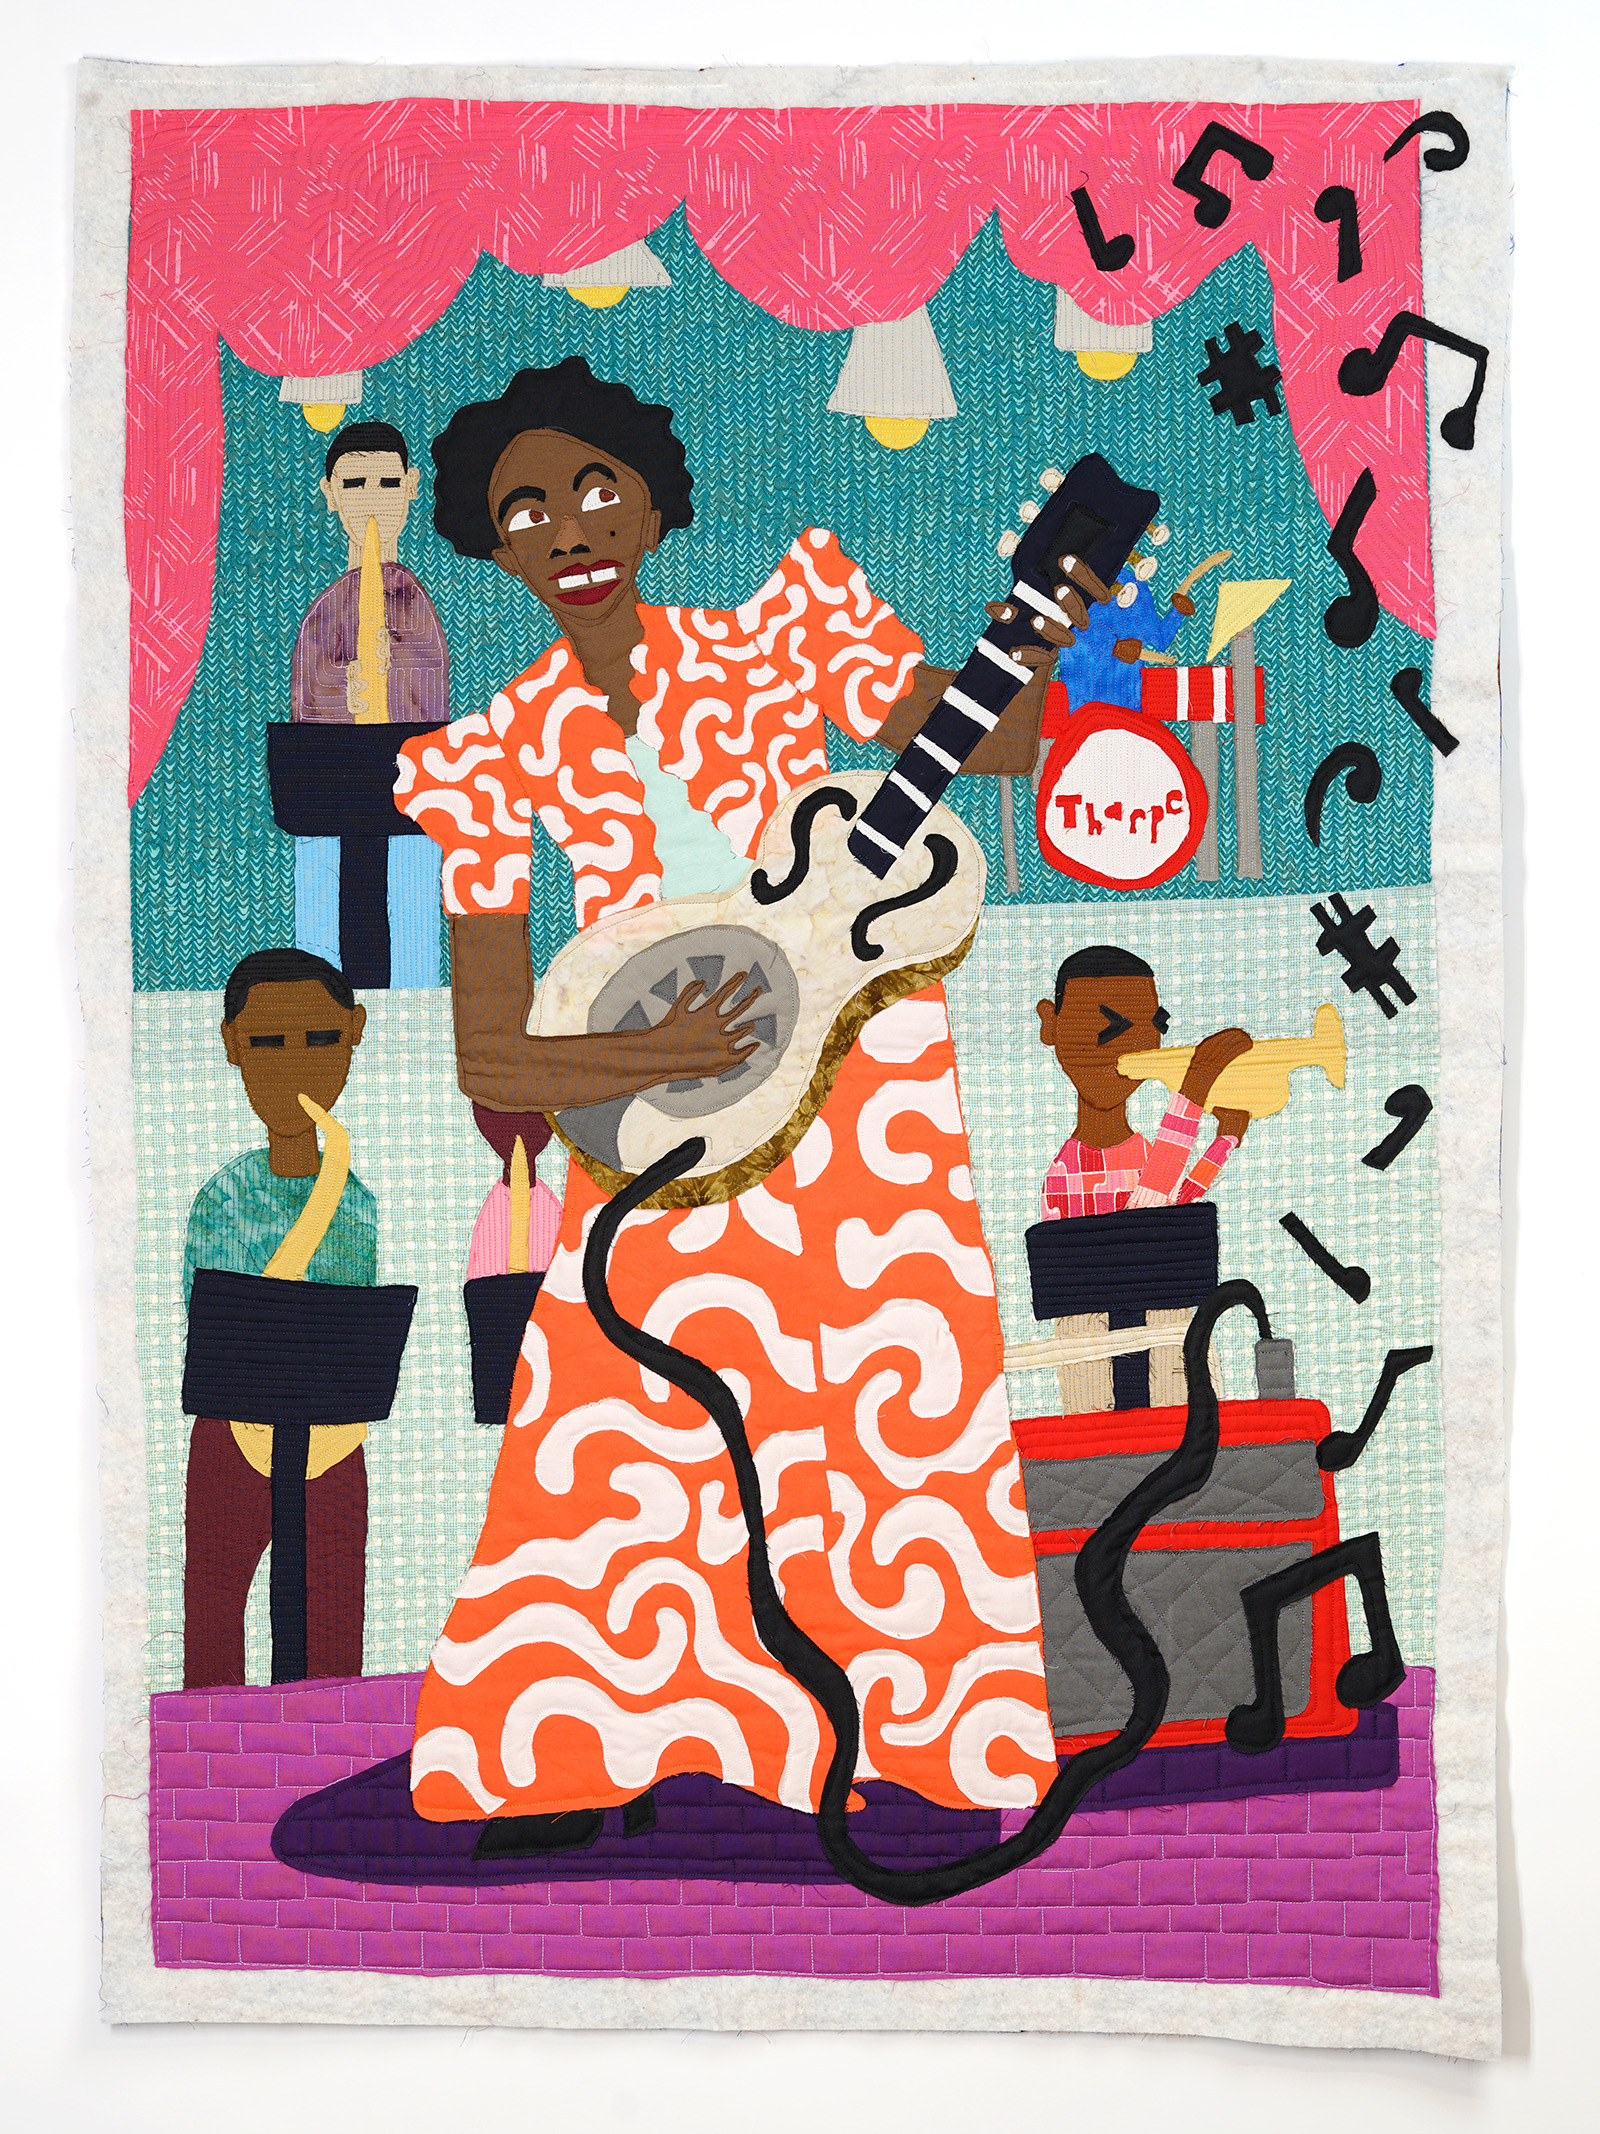 Black woman in a bright orange dress with white squiggly lines playing an electric guitar with children playing other instruments in the background